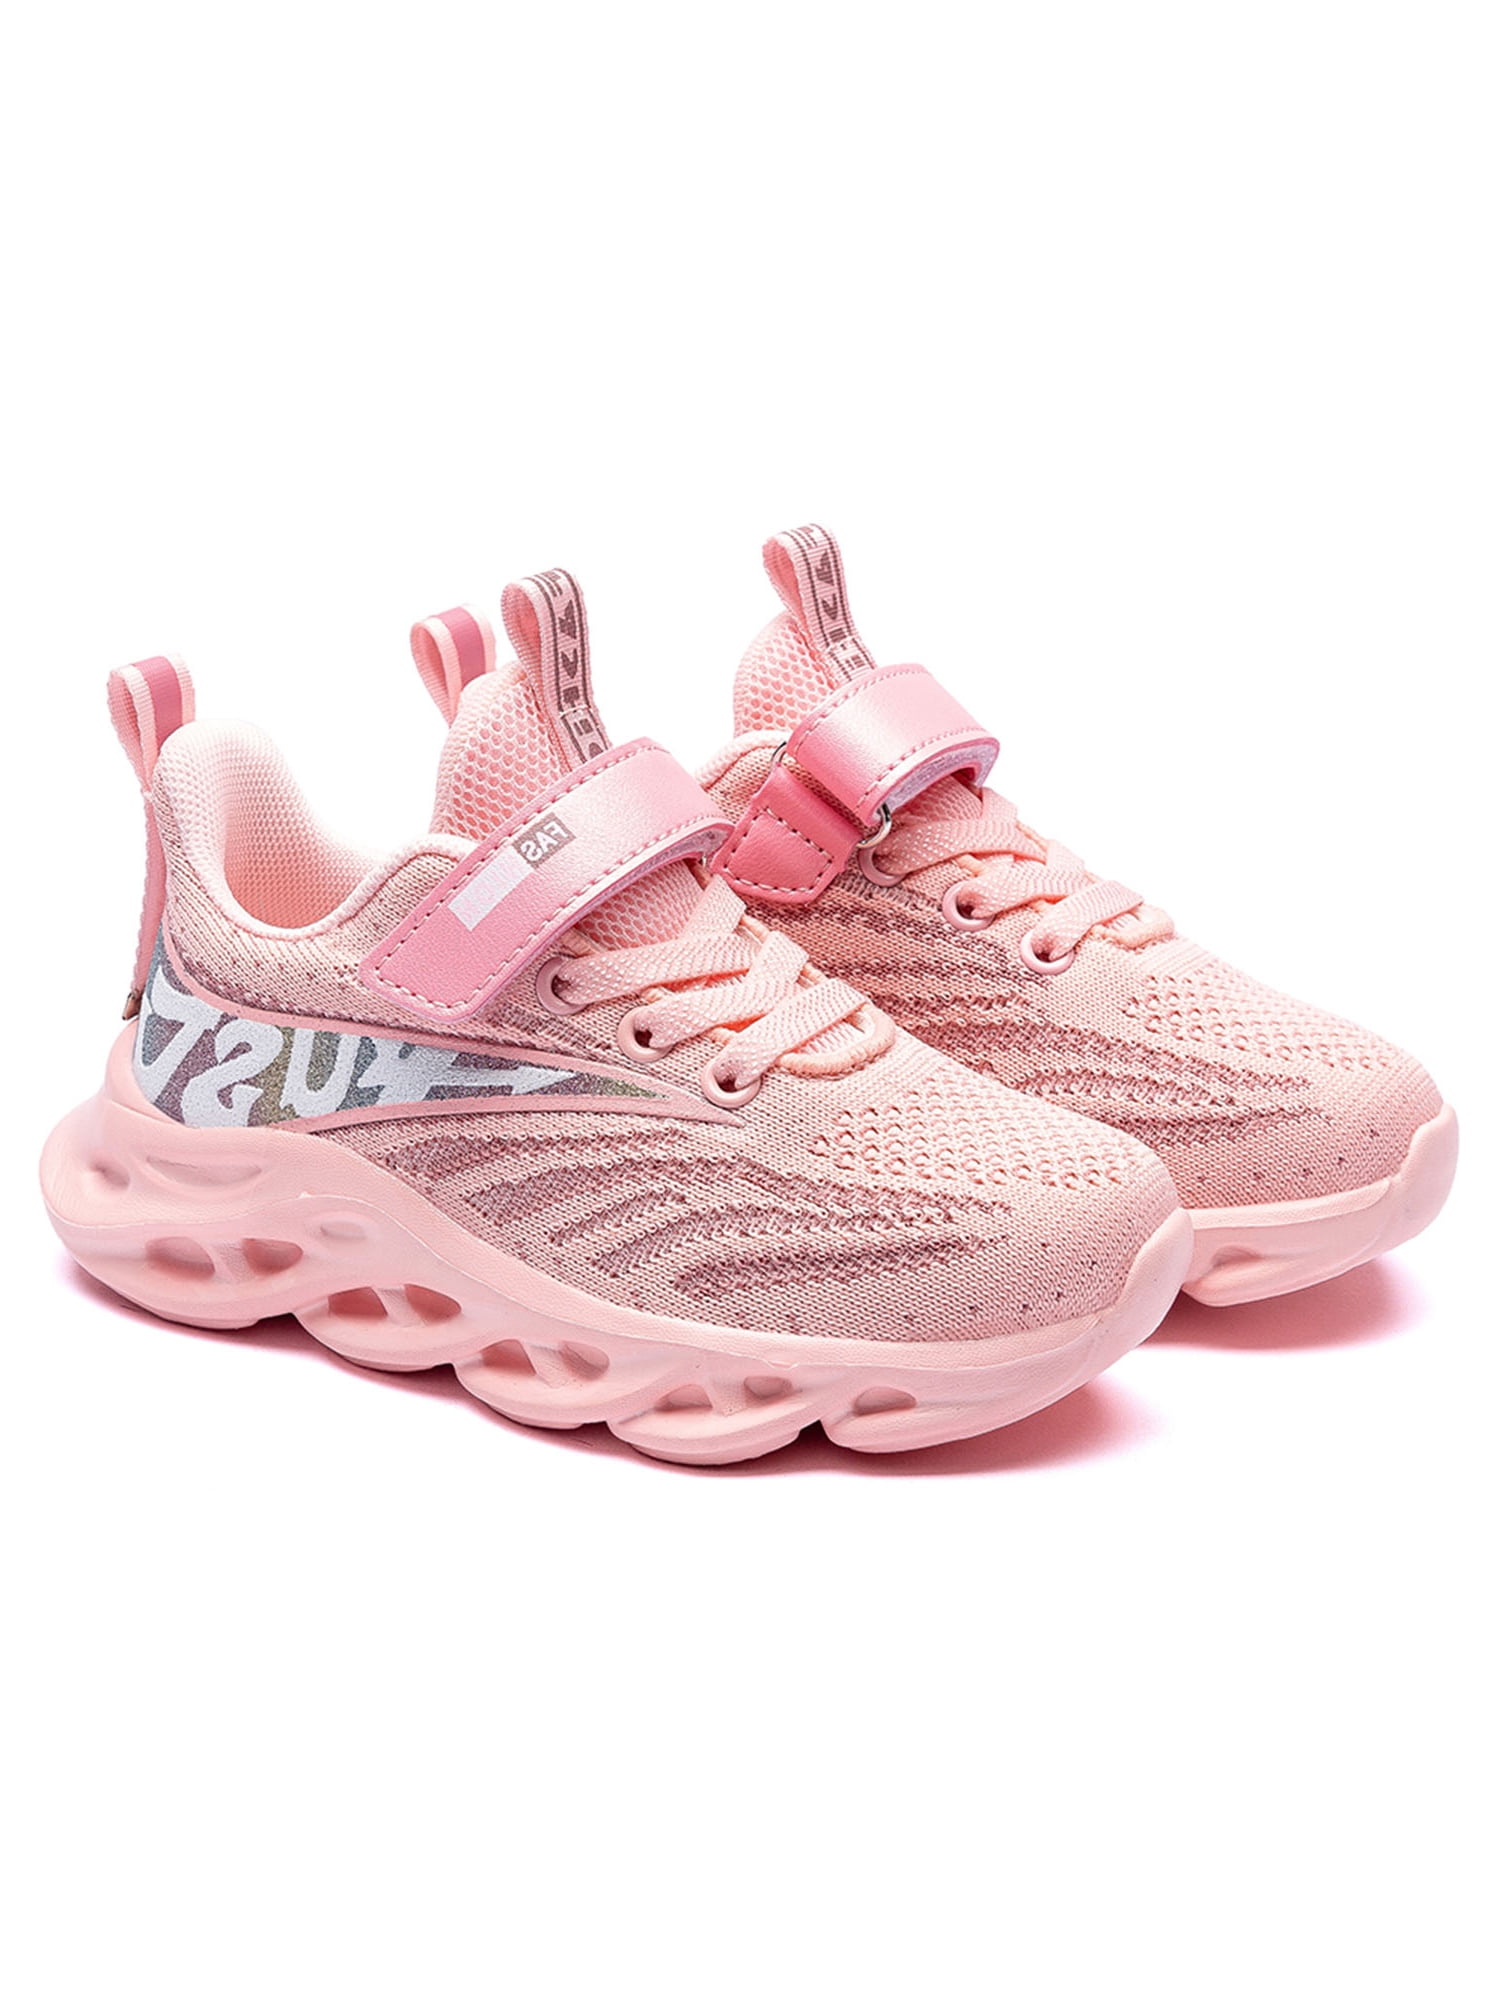 Shoes Womens Shoes Sneakers & Athletic Shoes Tie Sneakers Hello Kitty Shoes Light Breathable Casual Cute Pink Sneakers For Girl 